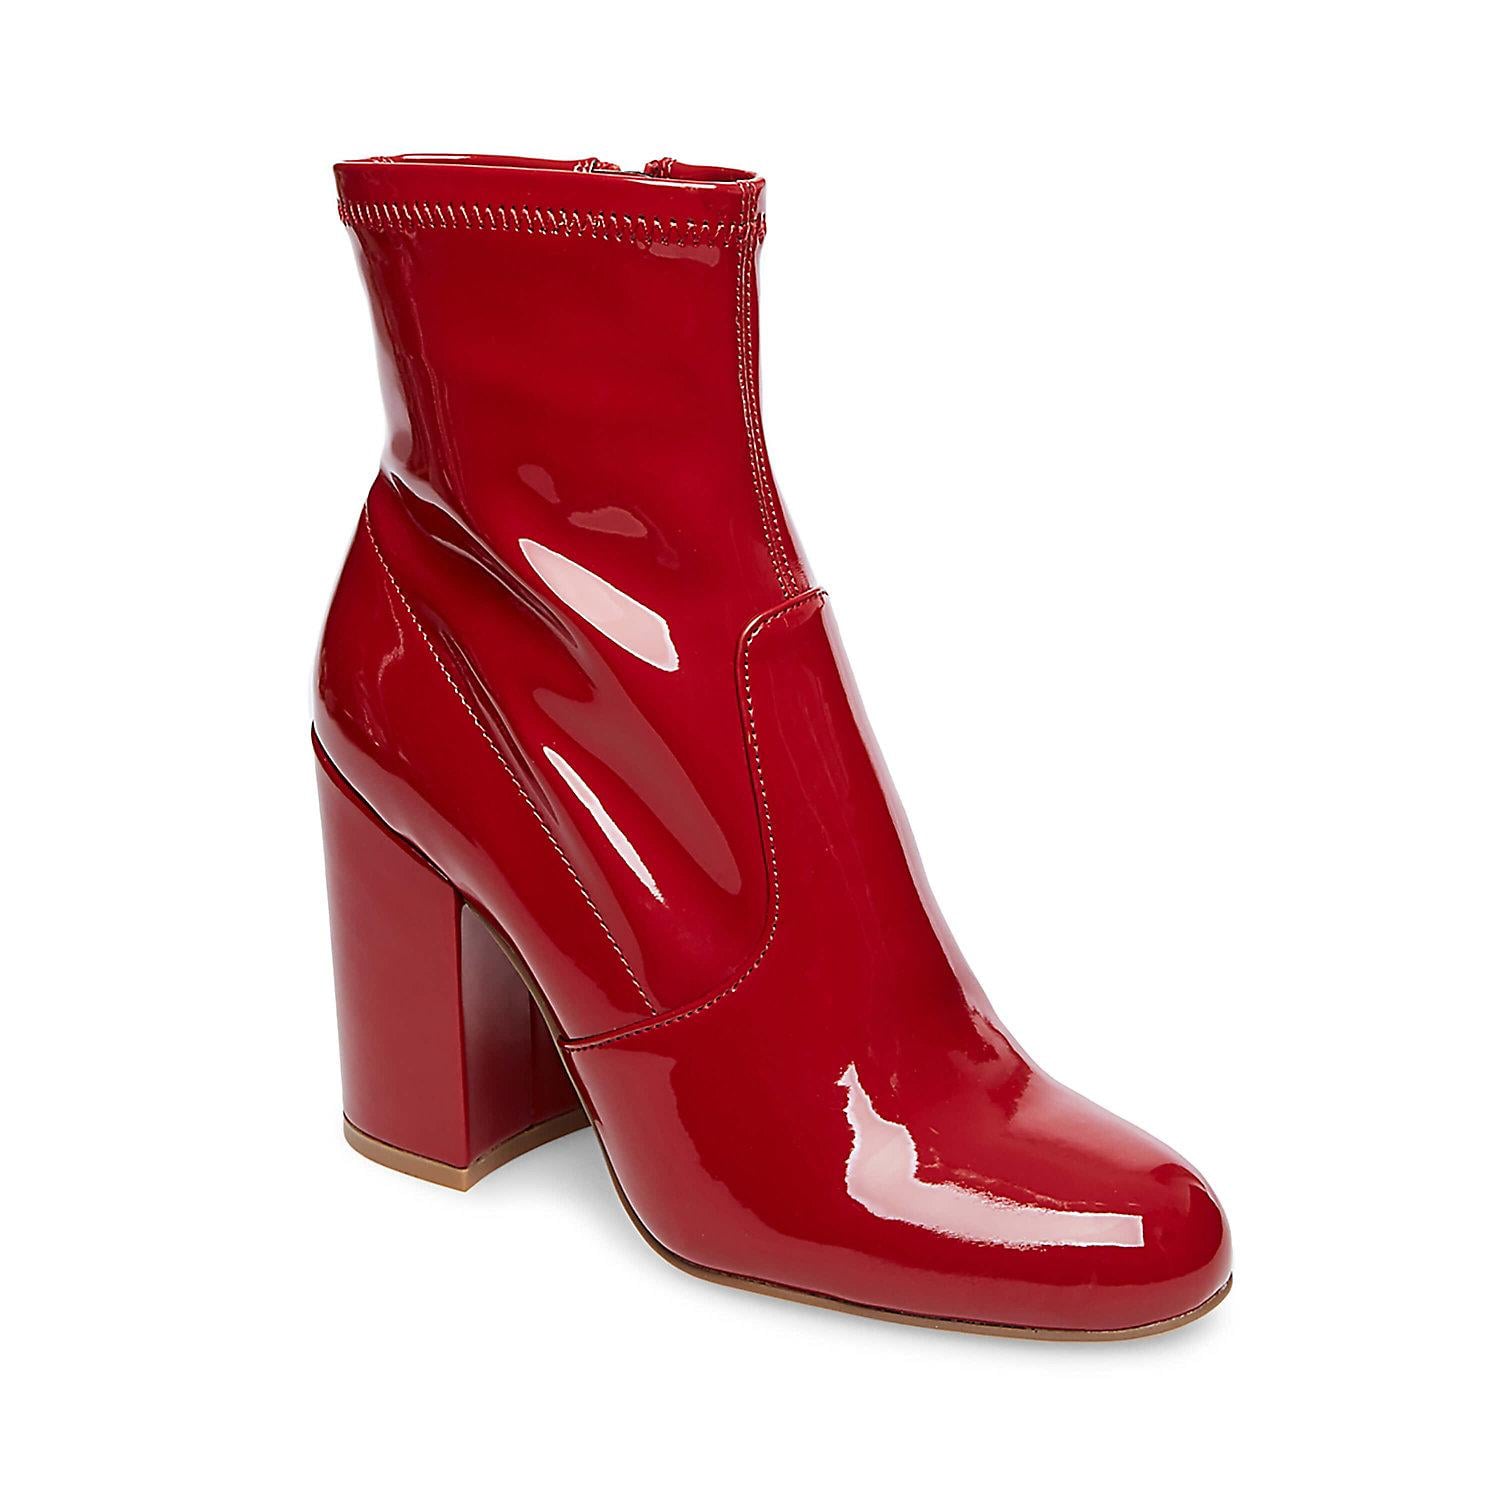 Picasso Inconcebible Creo que Steve Madden Gaze | 17 Reasons Why Red Boots Are Exactly What You Need For  Fall | POPSUGAR Fashion Photo 6